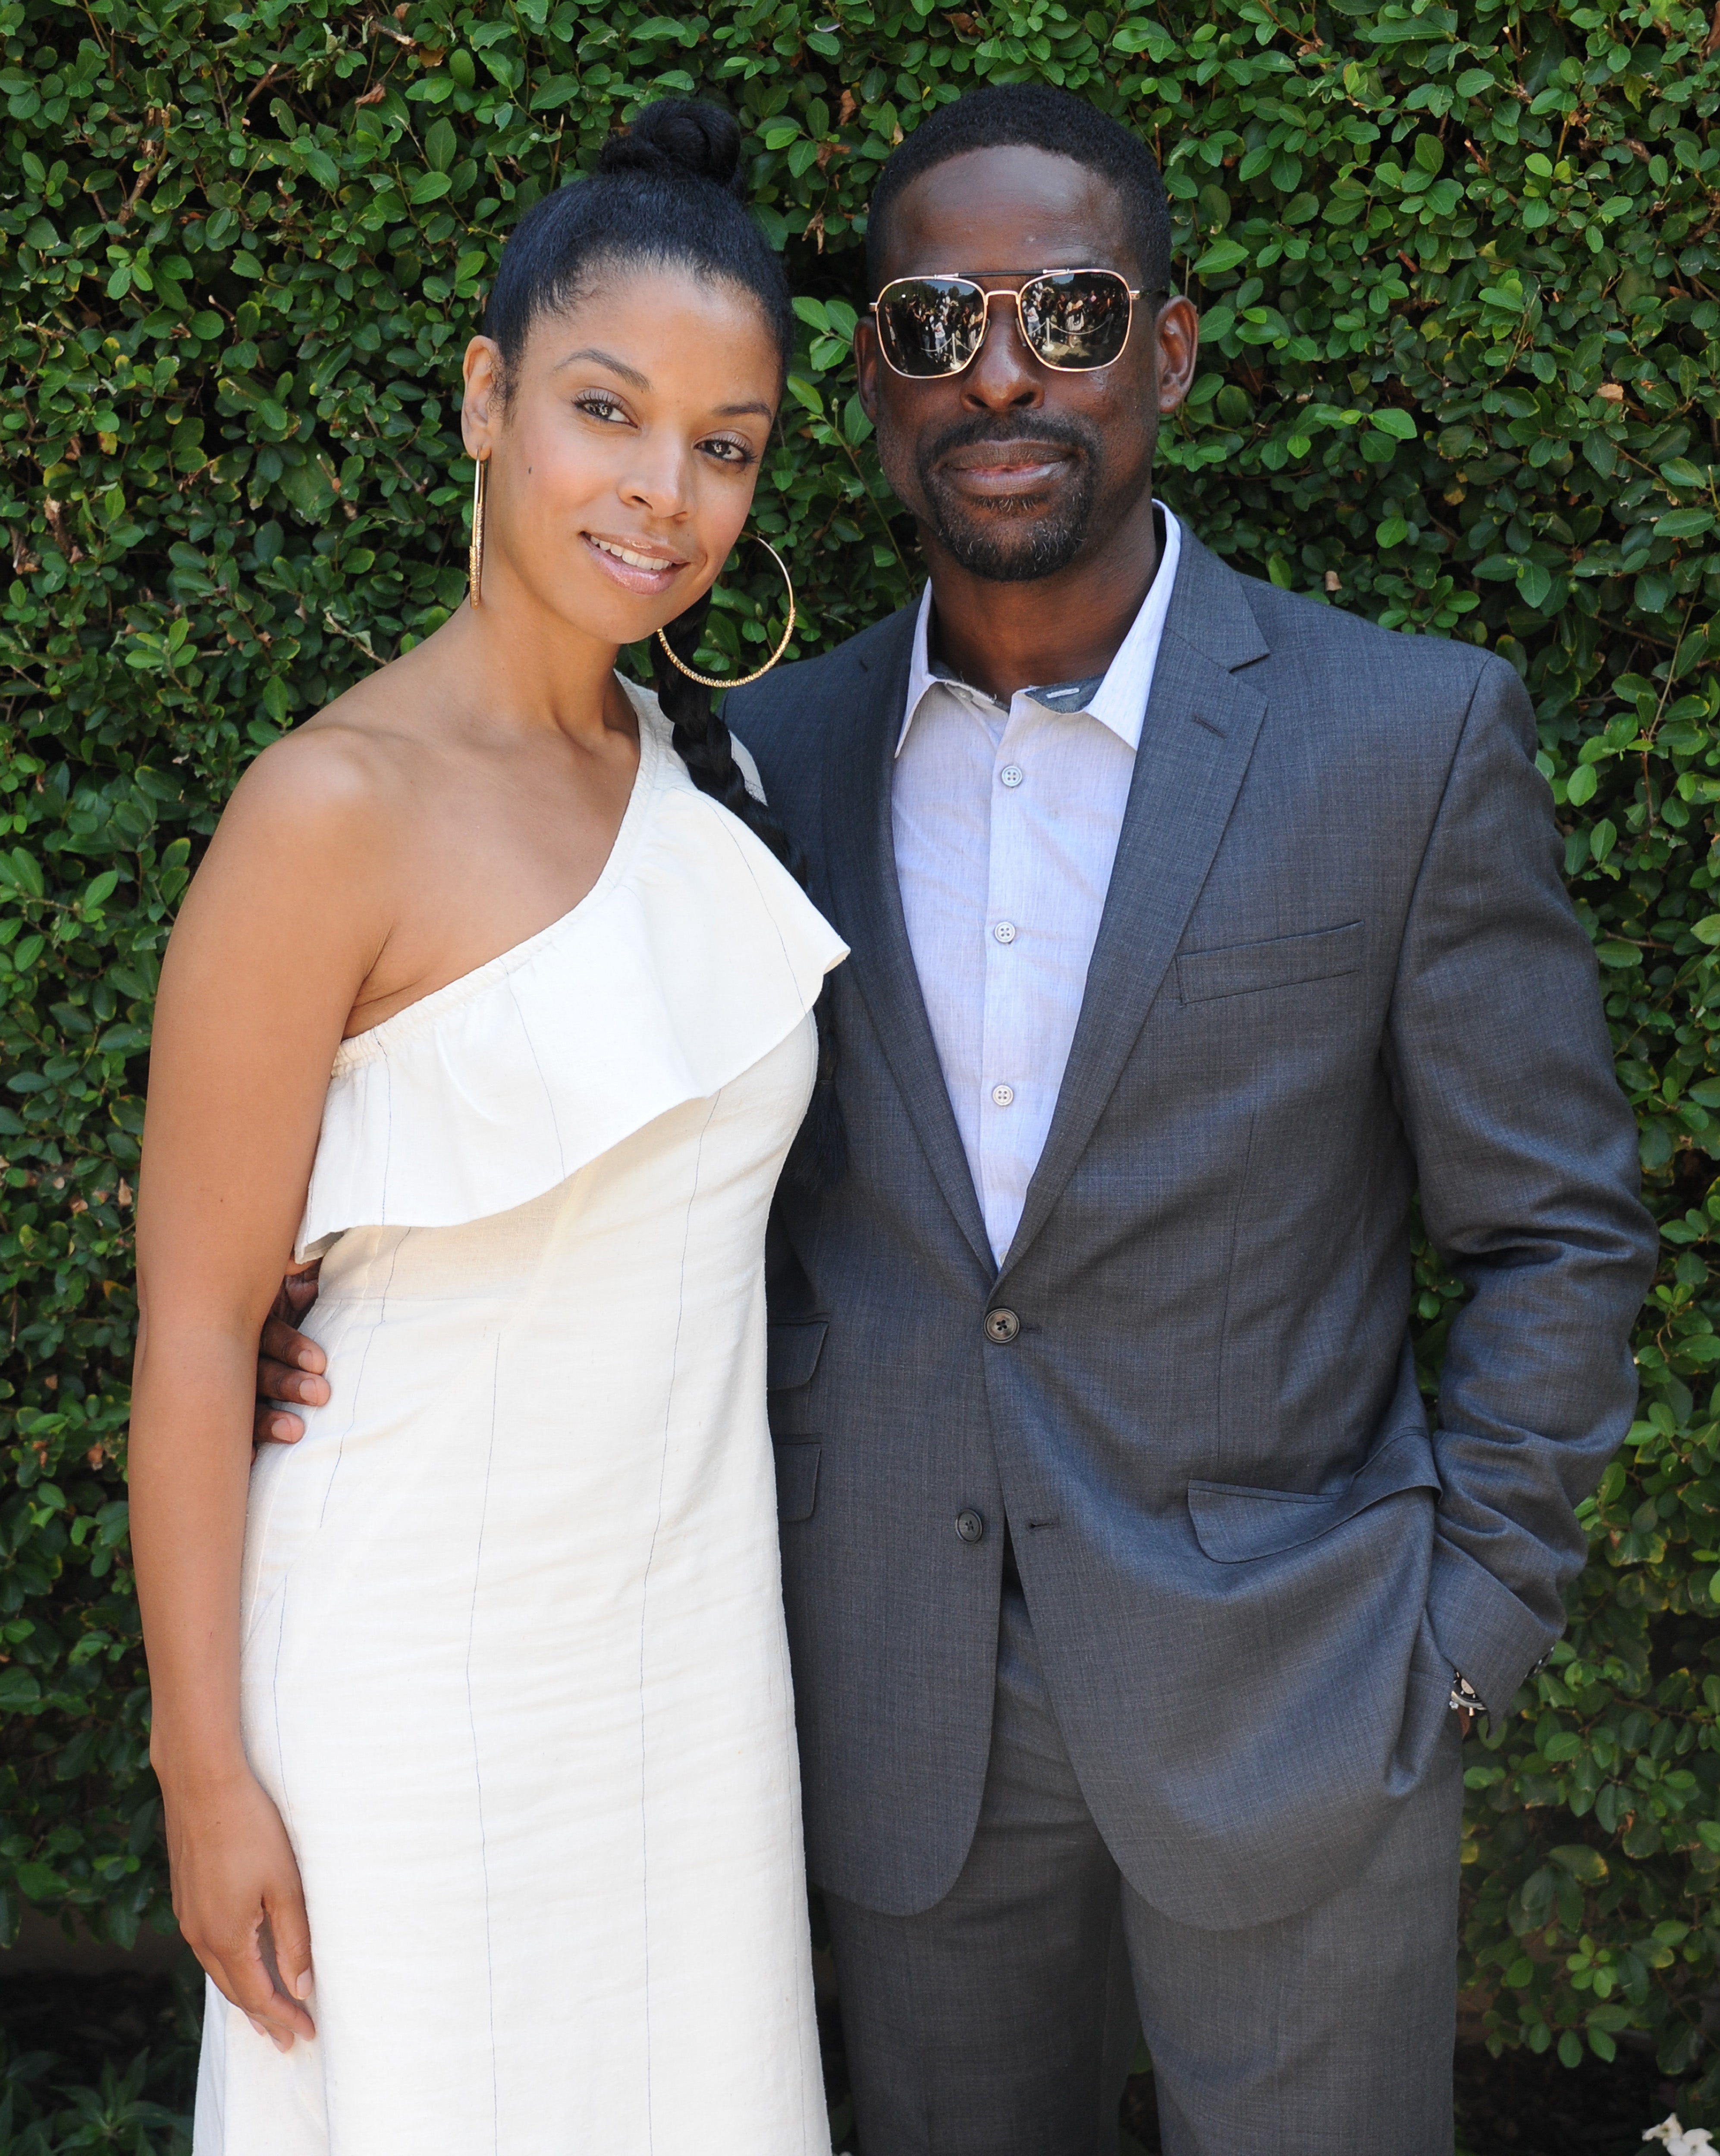 We Can't Stop Watching 'This Is Us' Star Sterling K. Brown and His Onscreen Wife Susan Kelechi Watson Take On #TheShiggyChallenge
